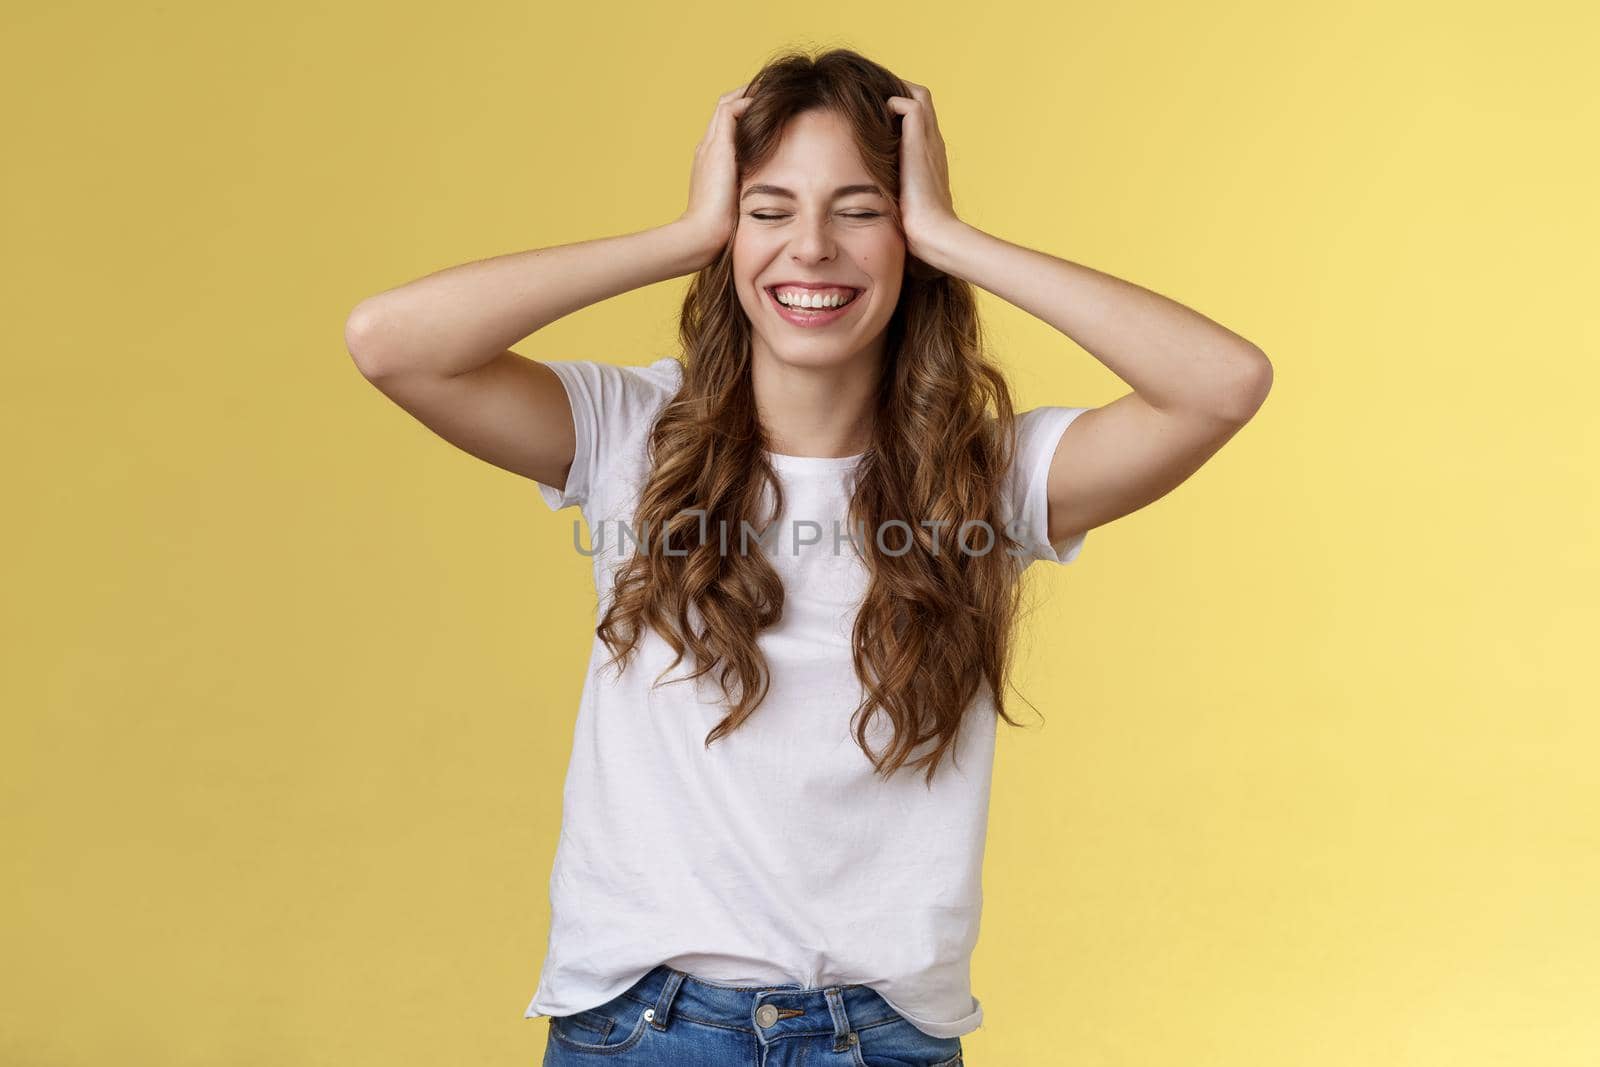 Joyful happy enthusiastic good-looking girl receive unbelievable awesome opportunity travel summer vacation abroad grab head close eyes smiling happily triumphing upbeat yellow background.